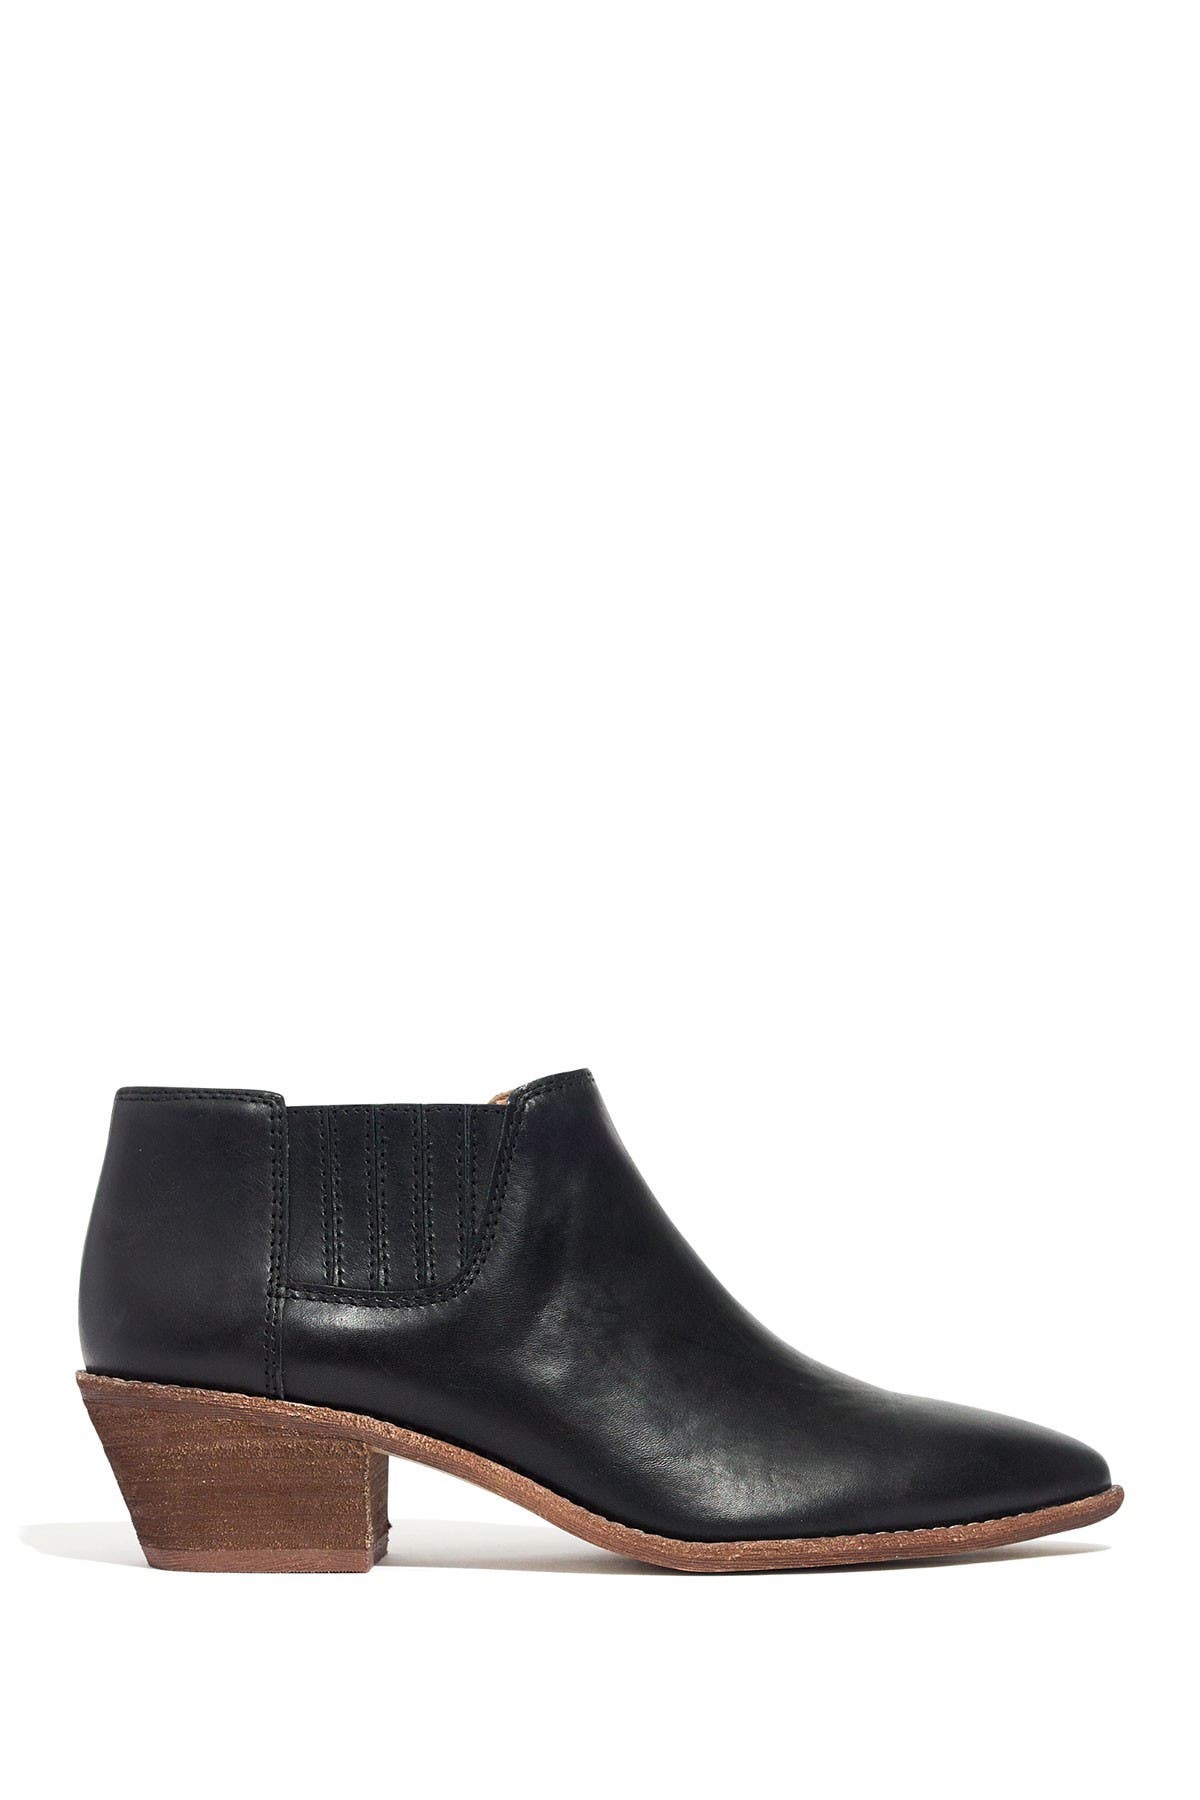 Madewell | Myles Leather Ankle Boot 